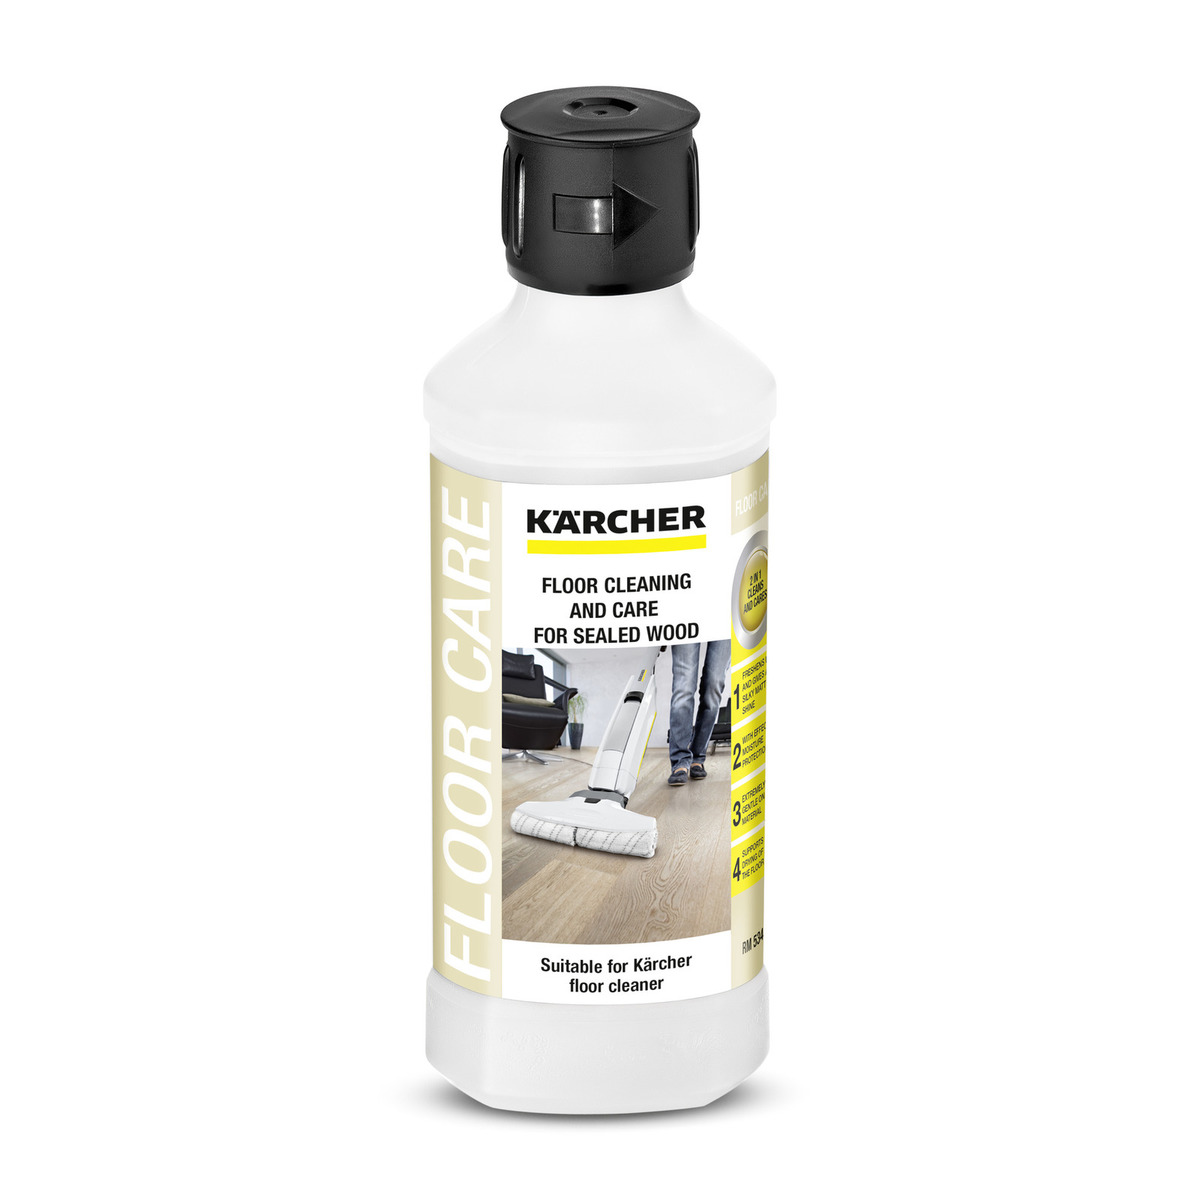 RM 534 – 0.5L, Floor cleaning & Care for sealed wood – Модон шал цэвэрлэгч, 0.5л